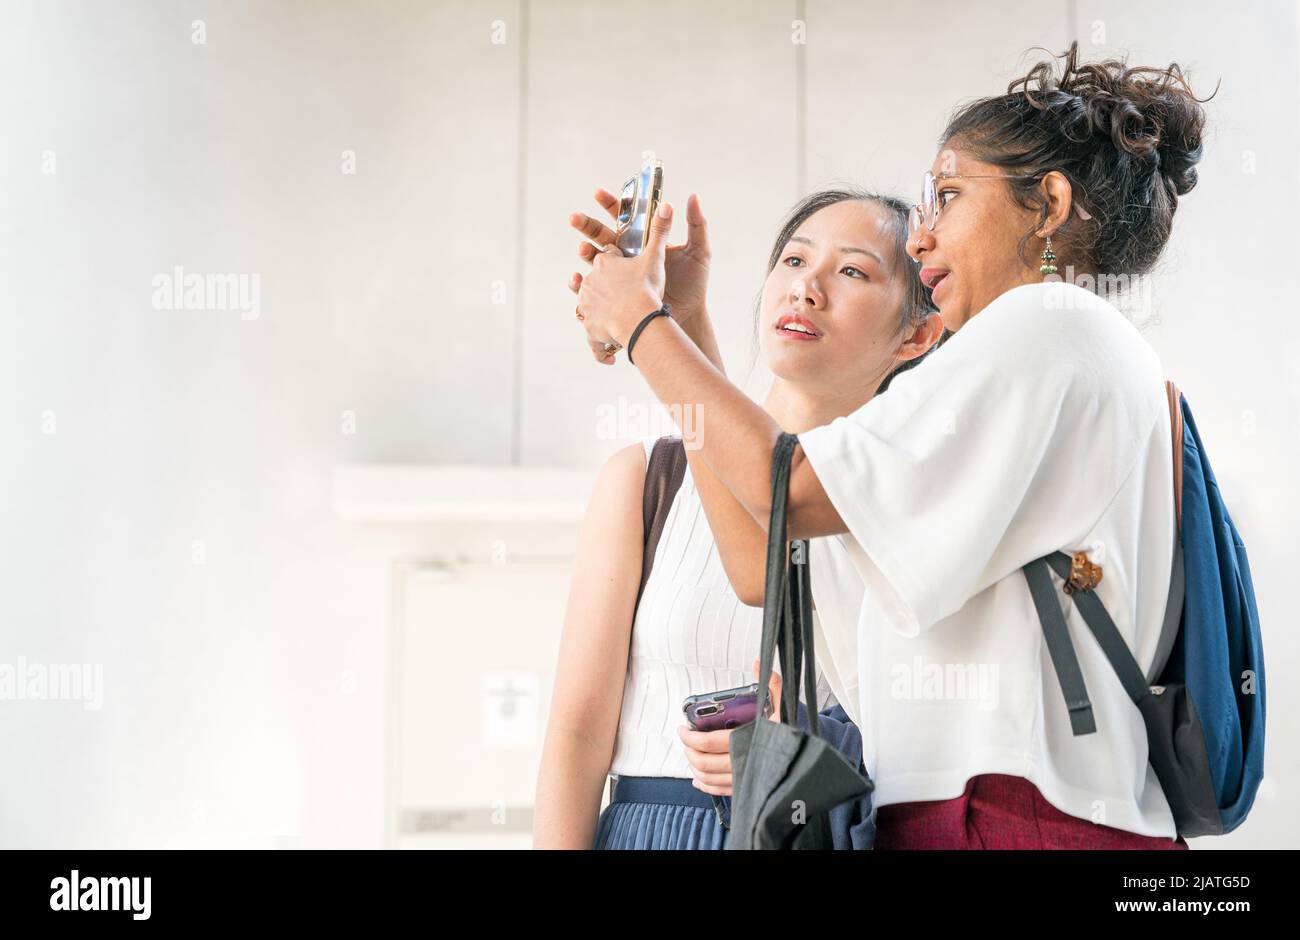 Two young women with different ethnicity looking at a smartphone together. Copy space. Stock Photo